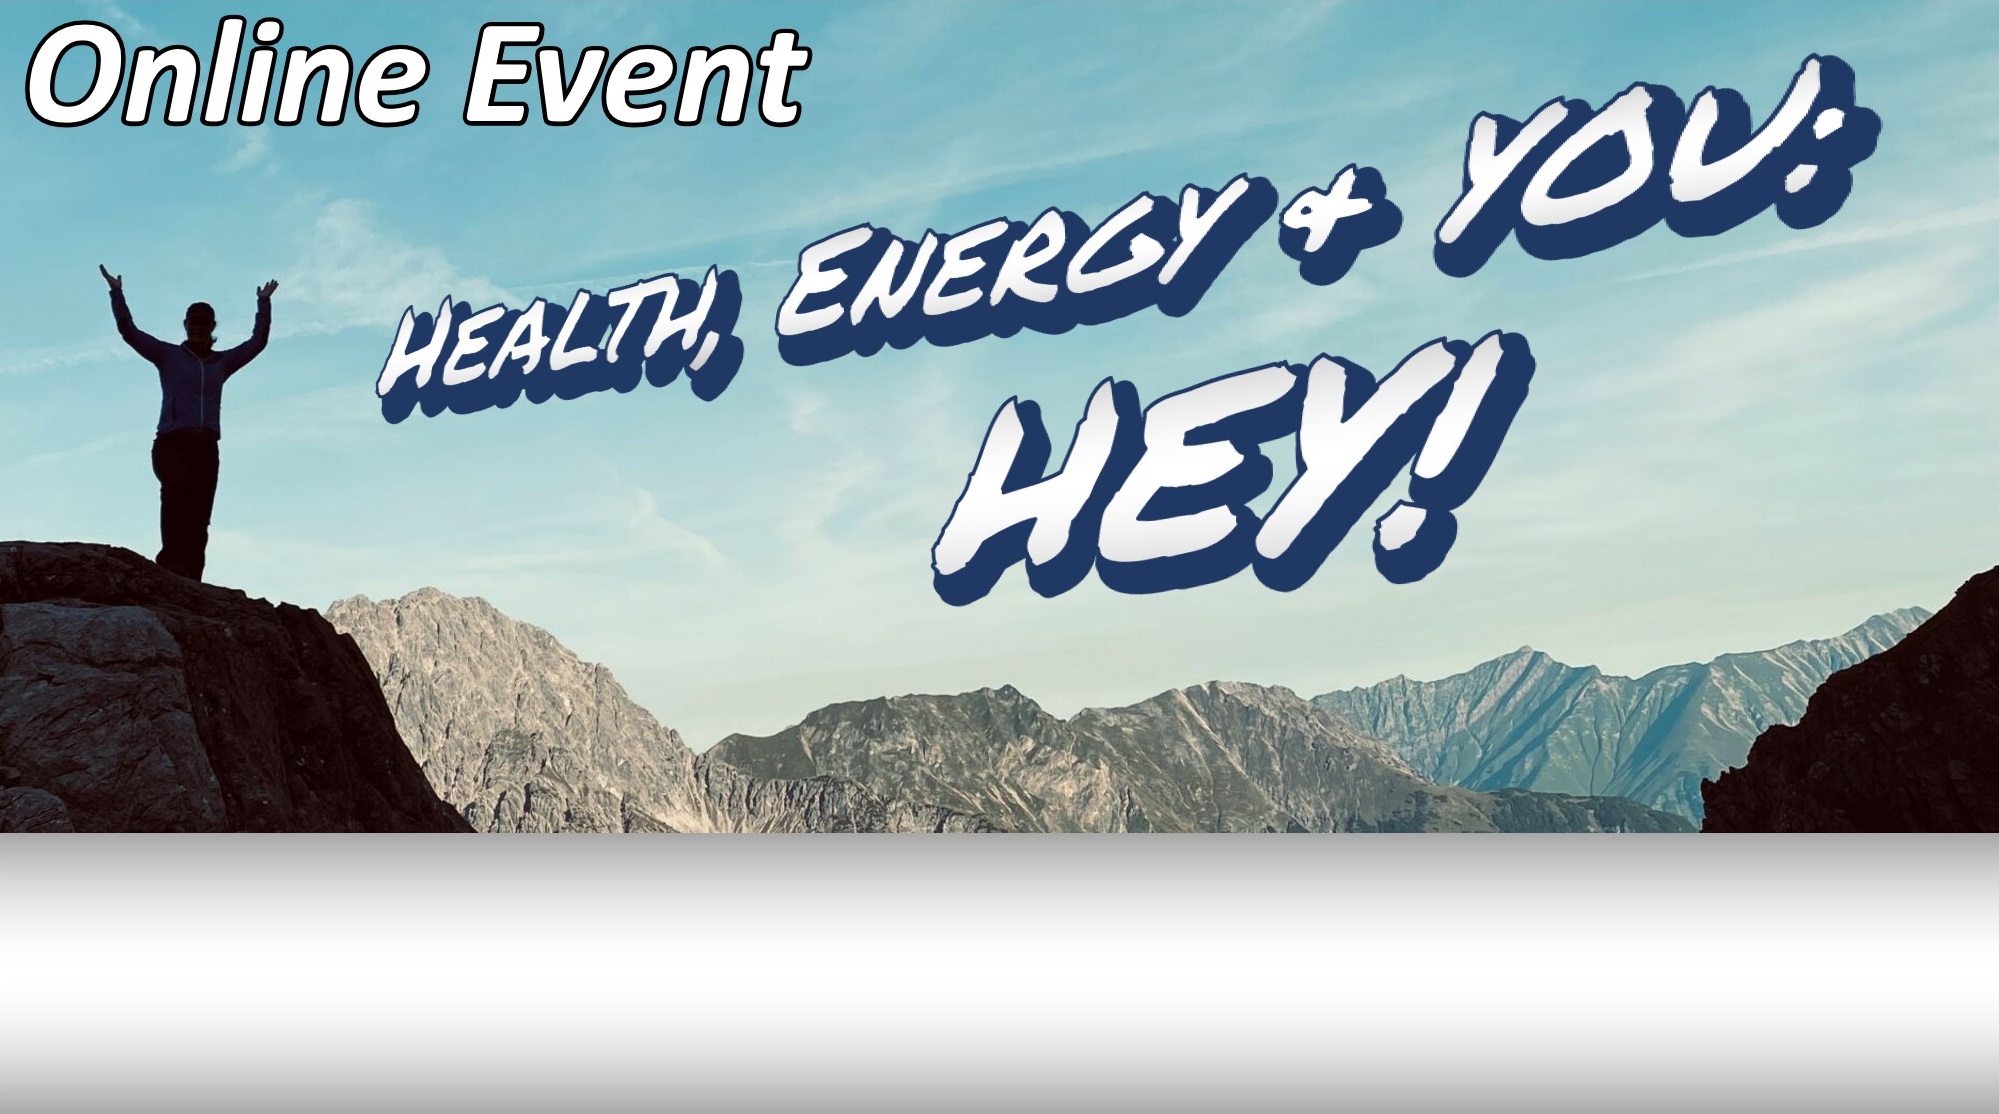 Online Event Health, Energy and YOU logo 2